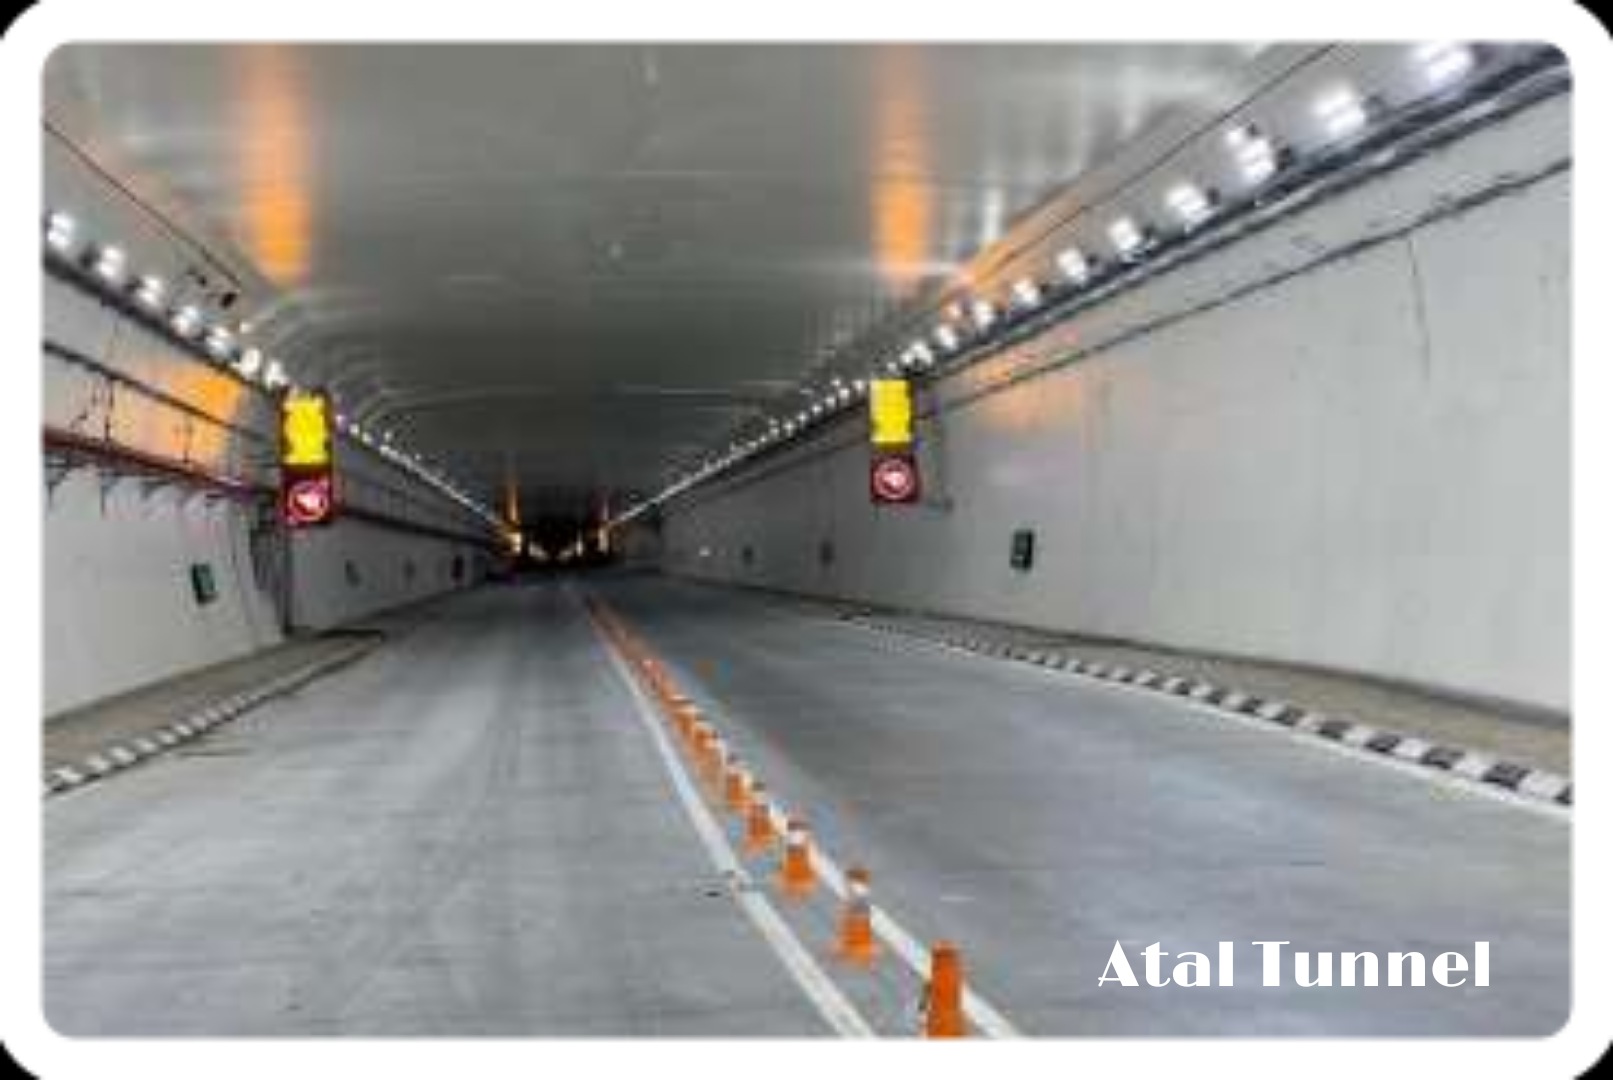 Atal Tunnel Longest Highway Tunnel In The World - जानिए अटल टनल से जुडी